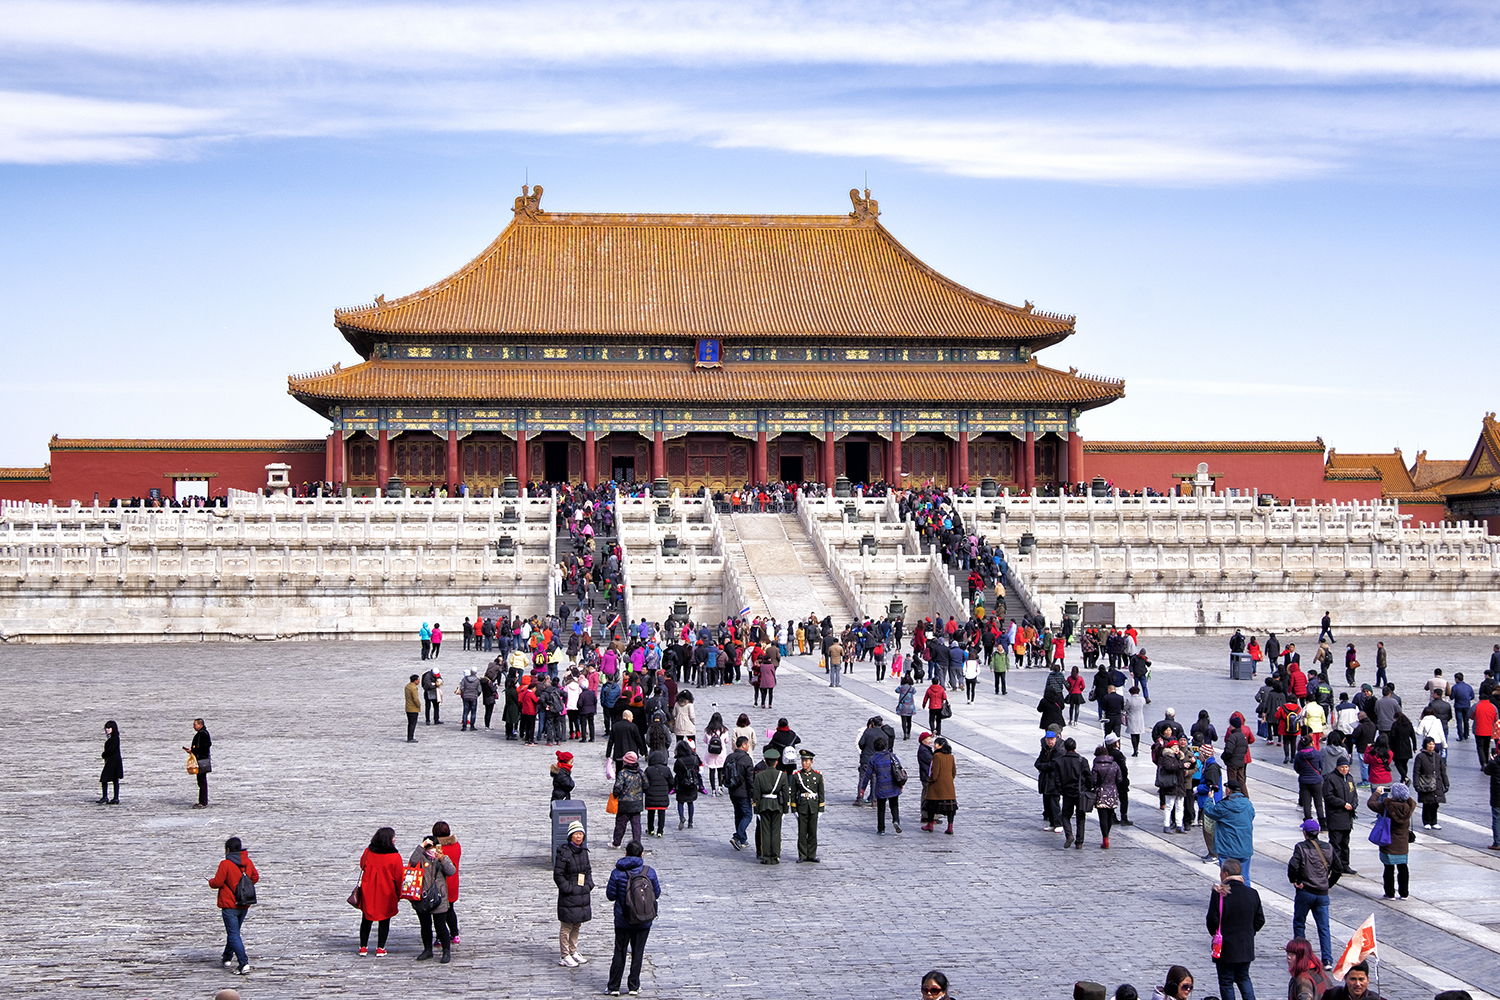 The Hall of Supreme Harmony, in The Forbidden City